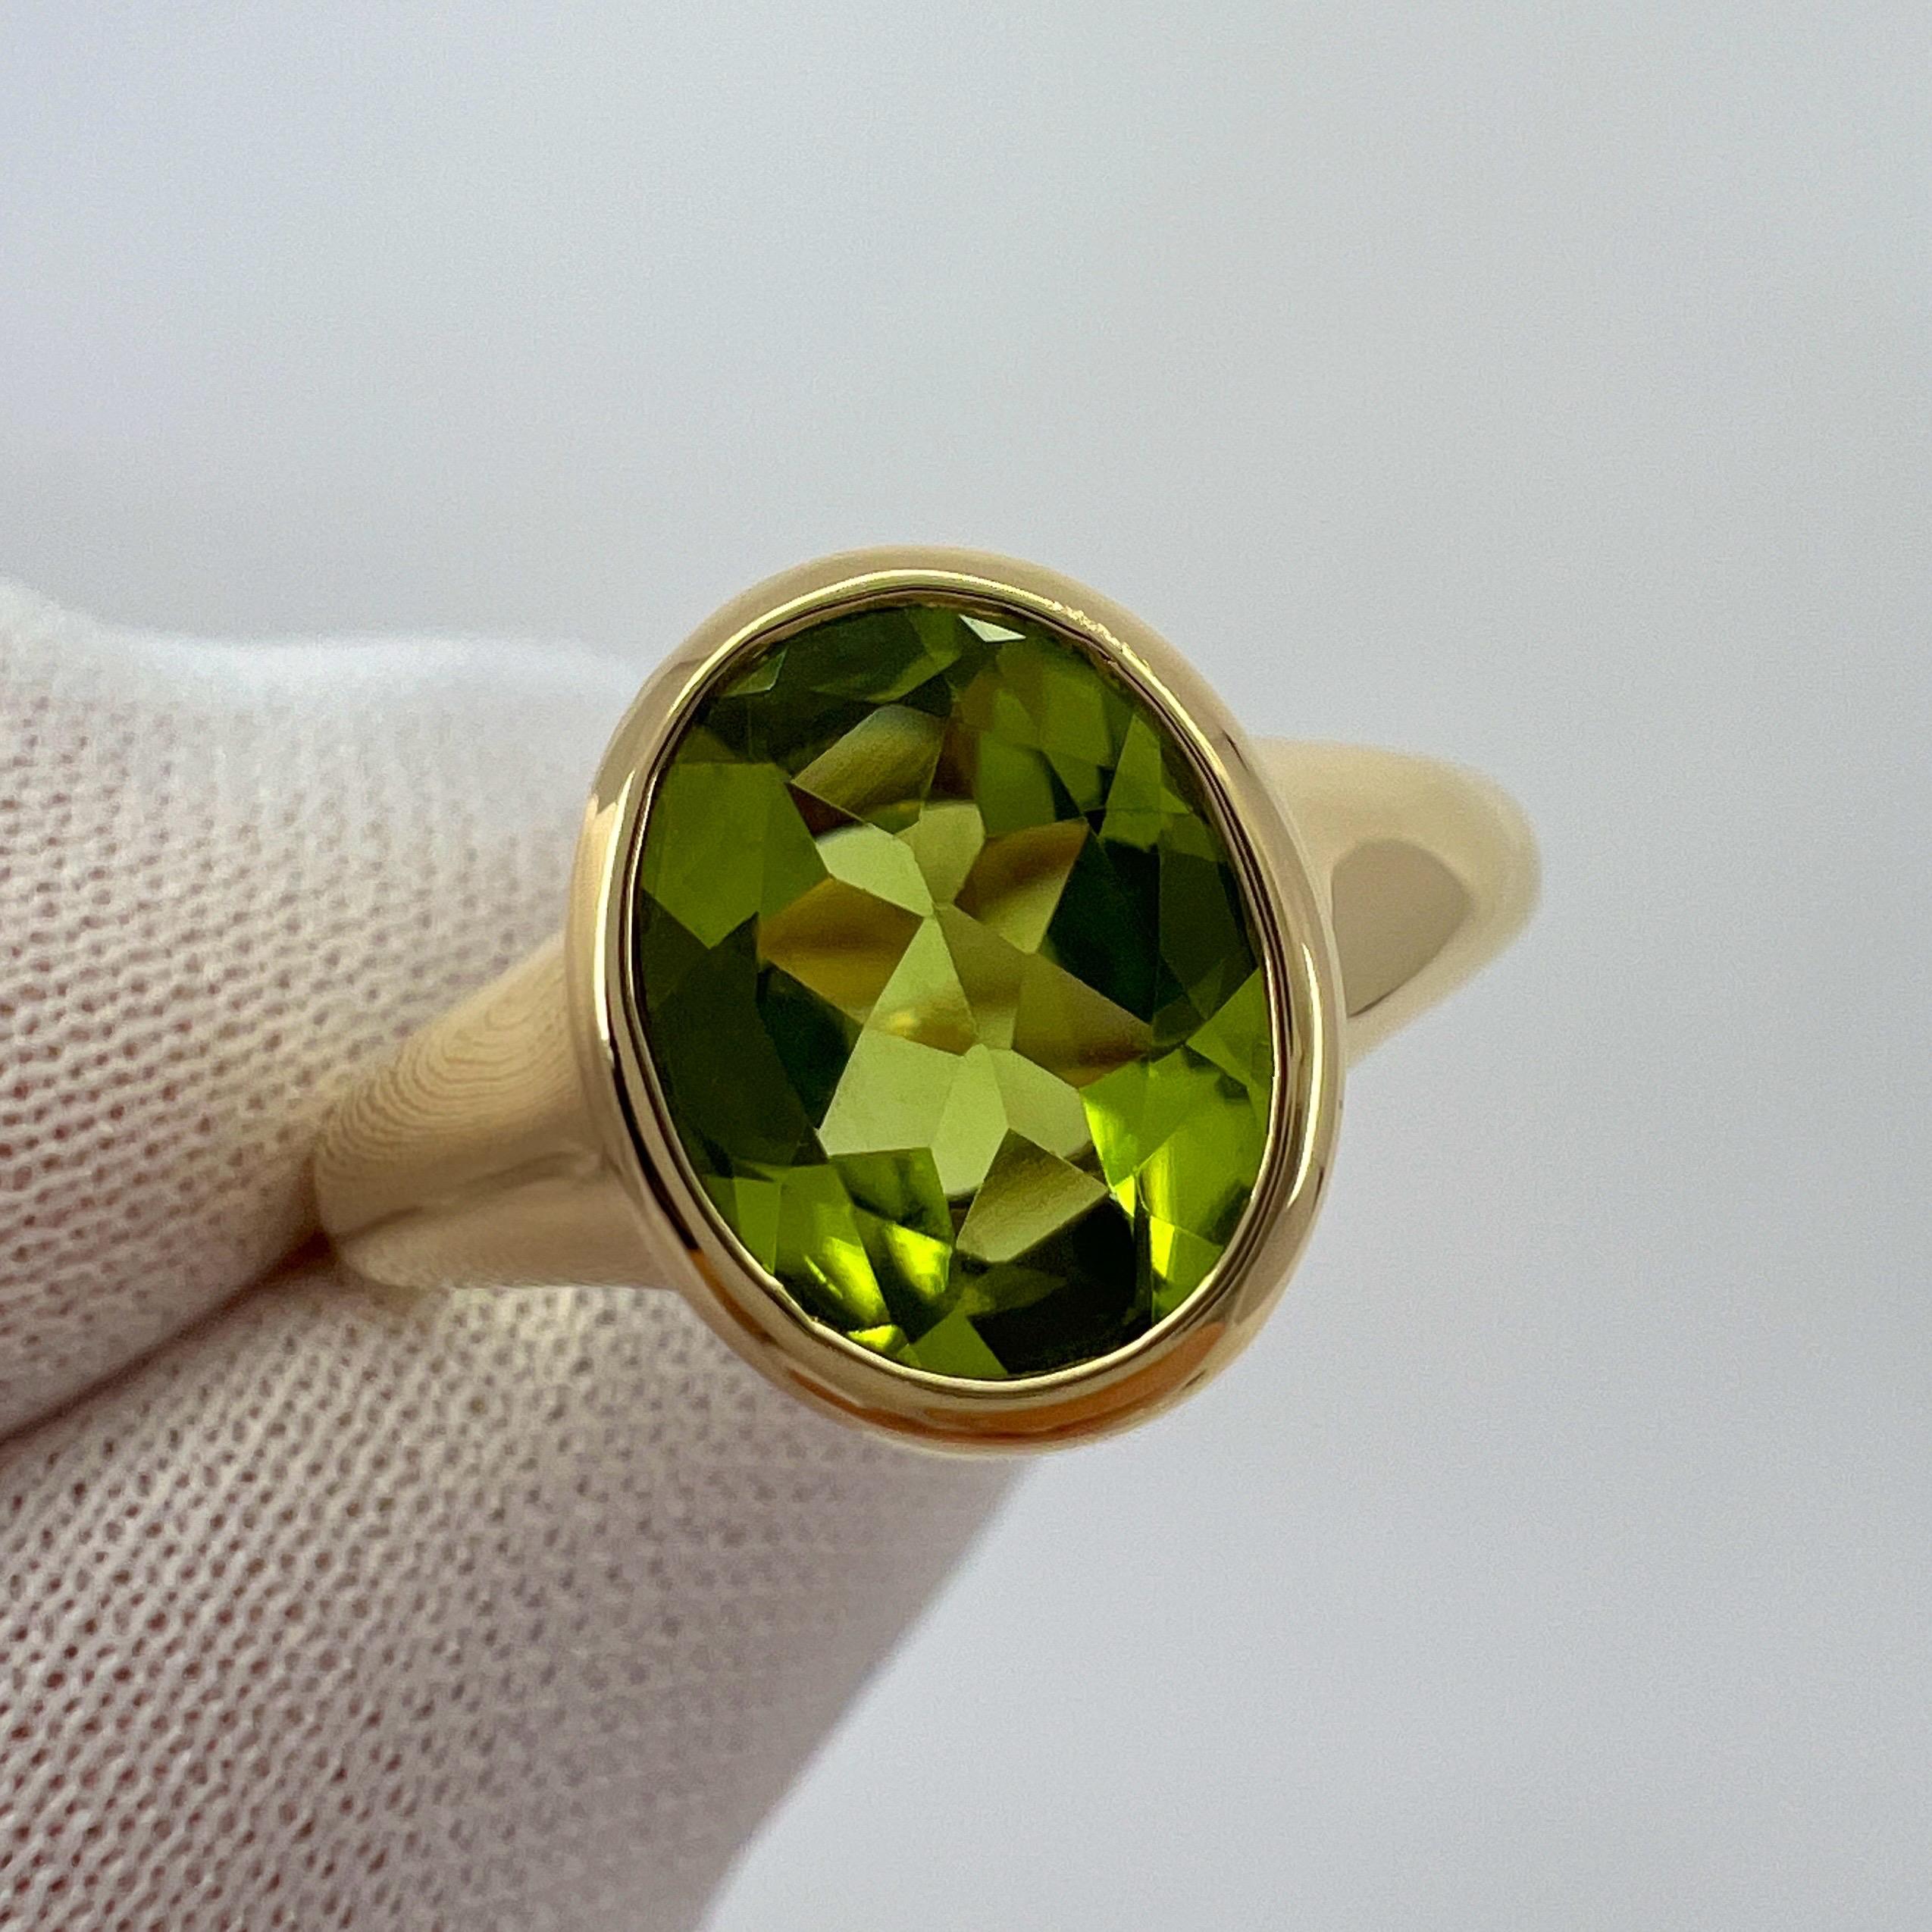 Rare Bvlgari Green Peridot Oval 18k Yellow Gold Signet Style Bezel Rubover Ring For Sale 3